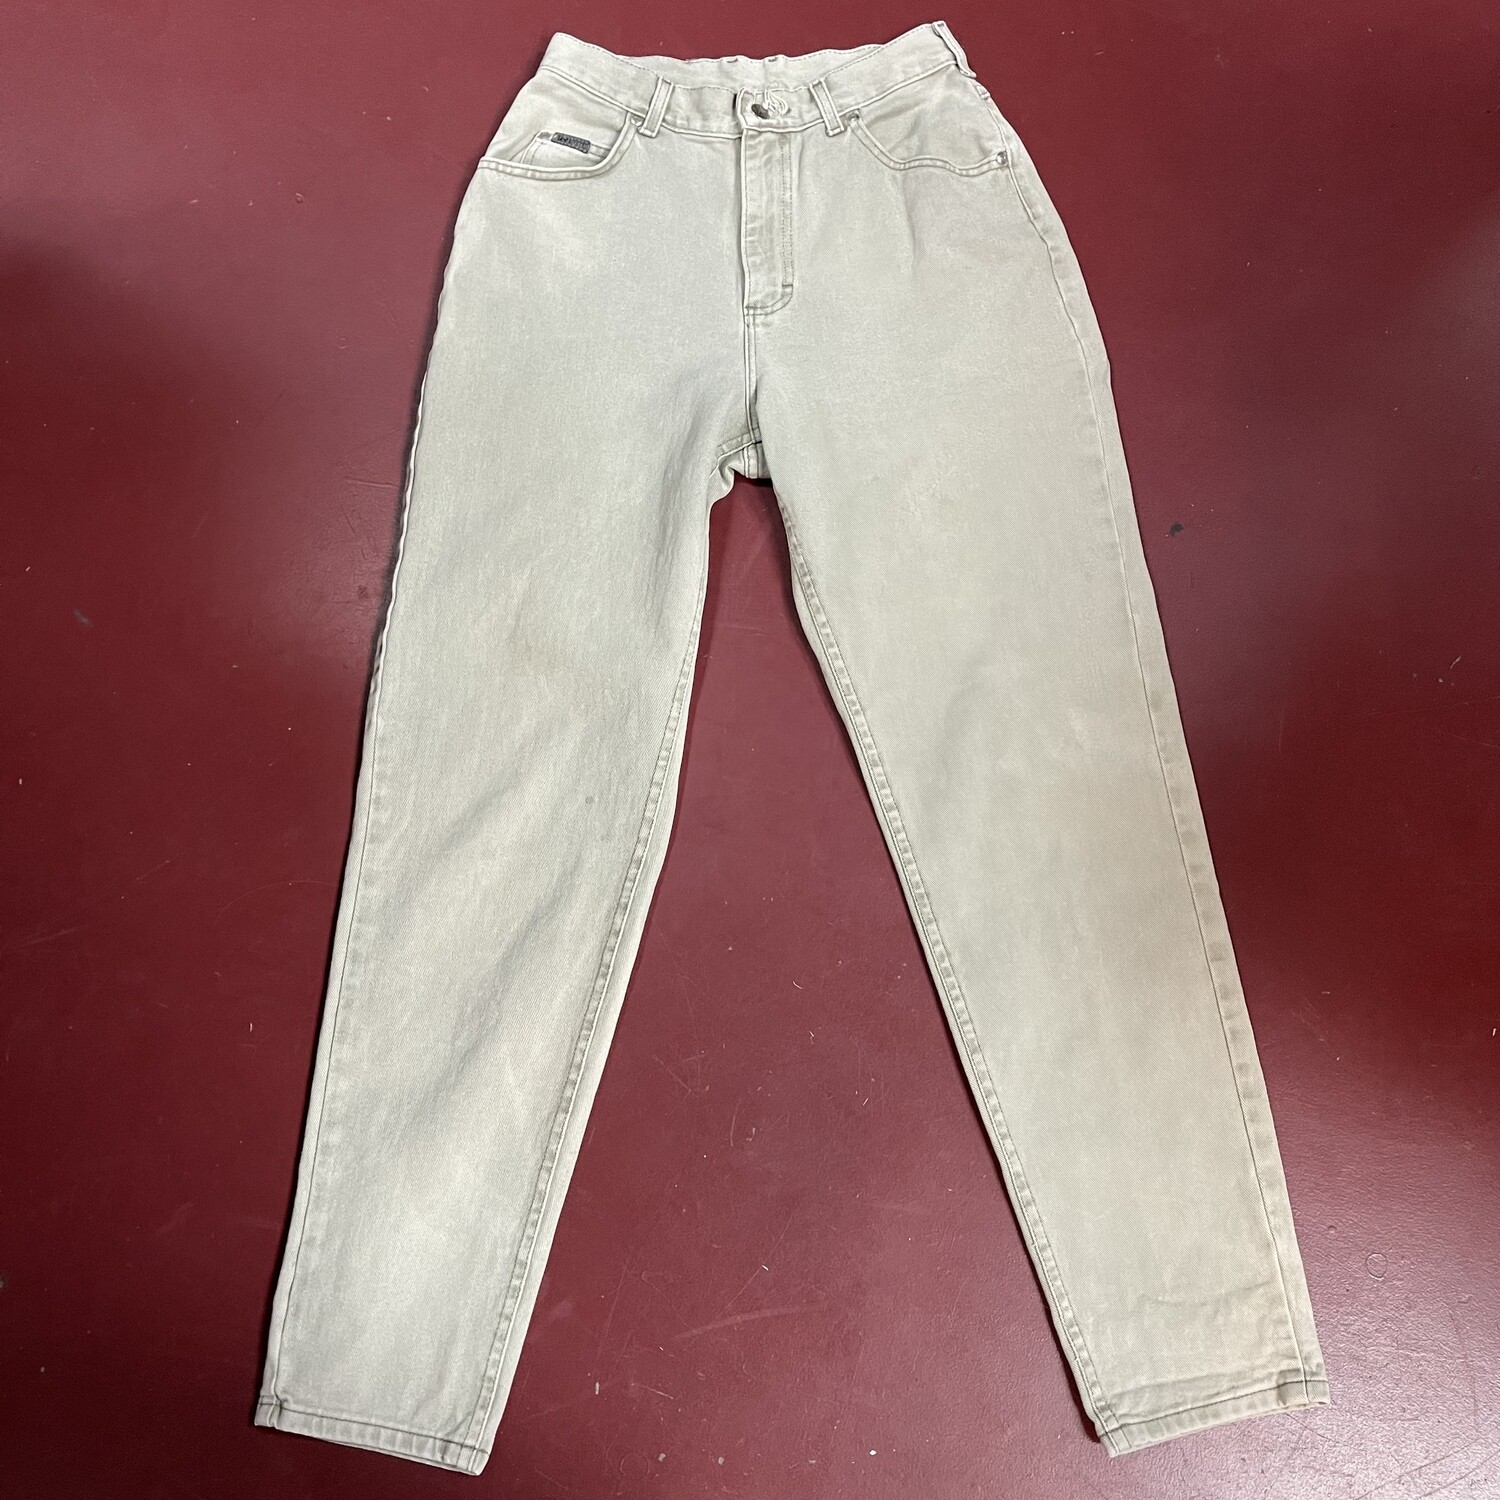 Vintage 1980s Lee Riveted high waisted mom jeans